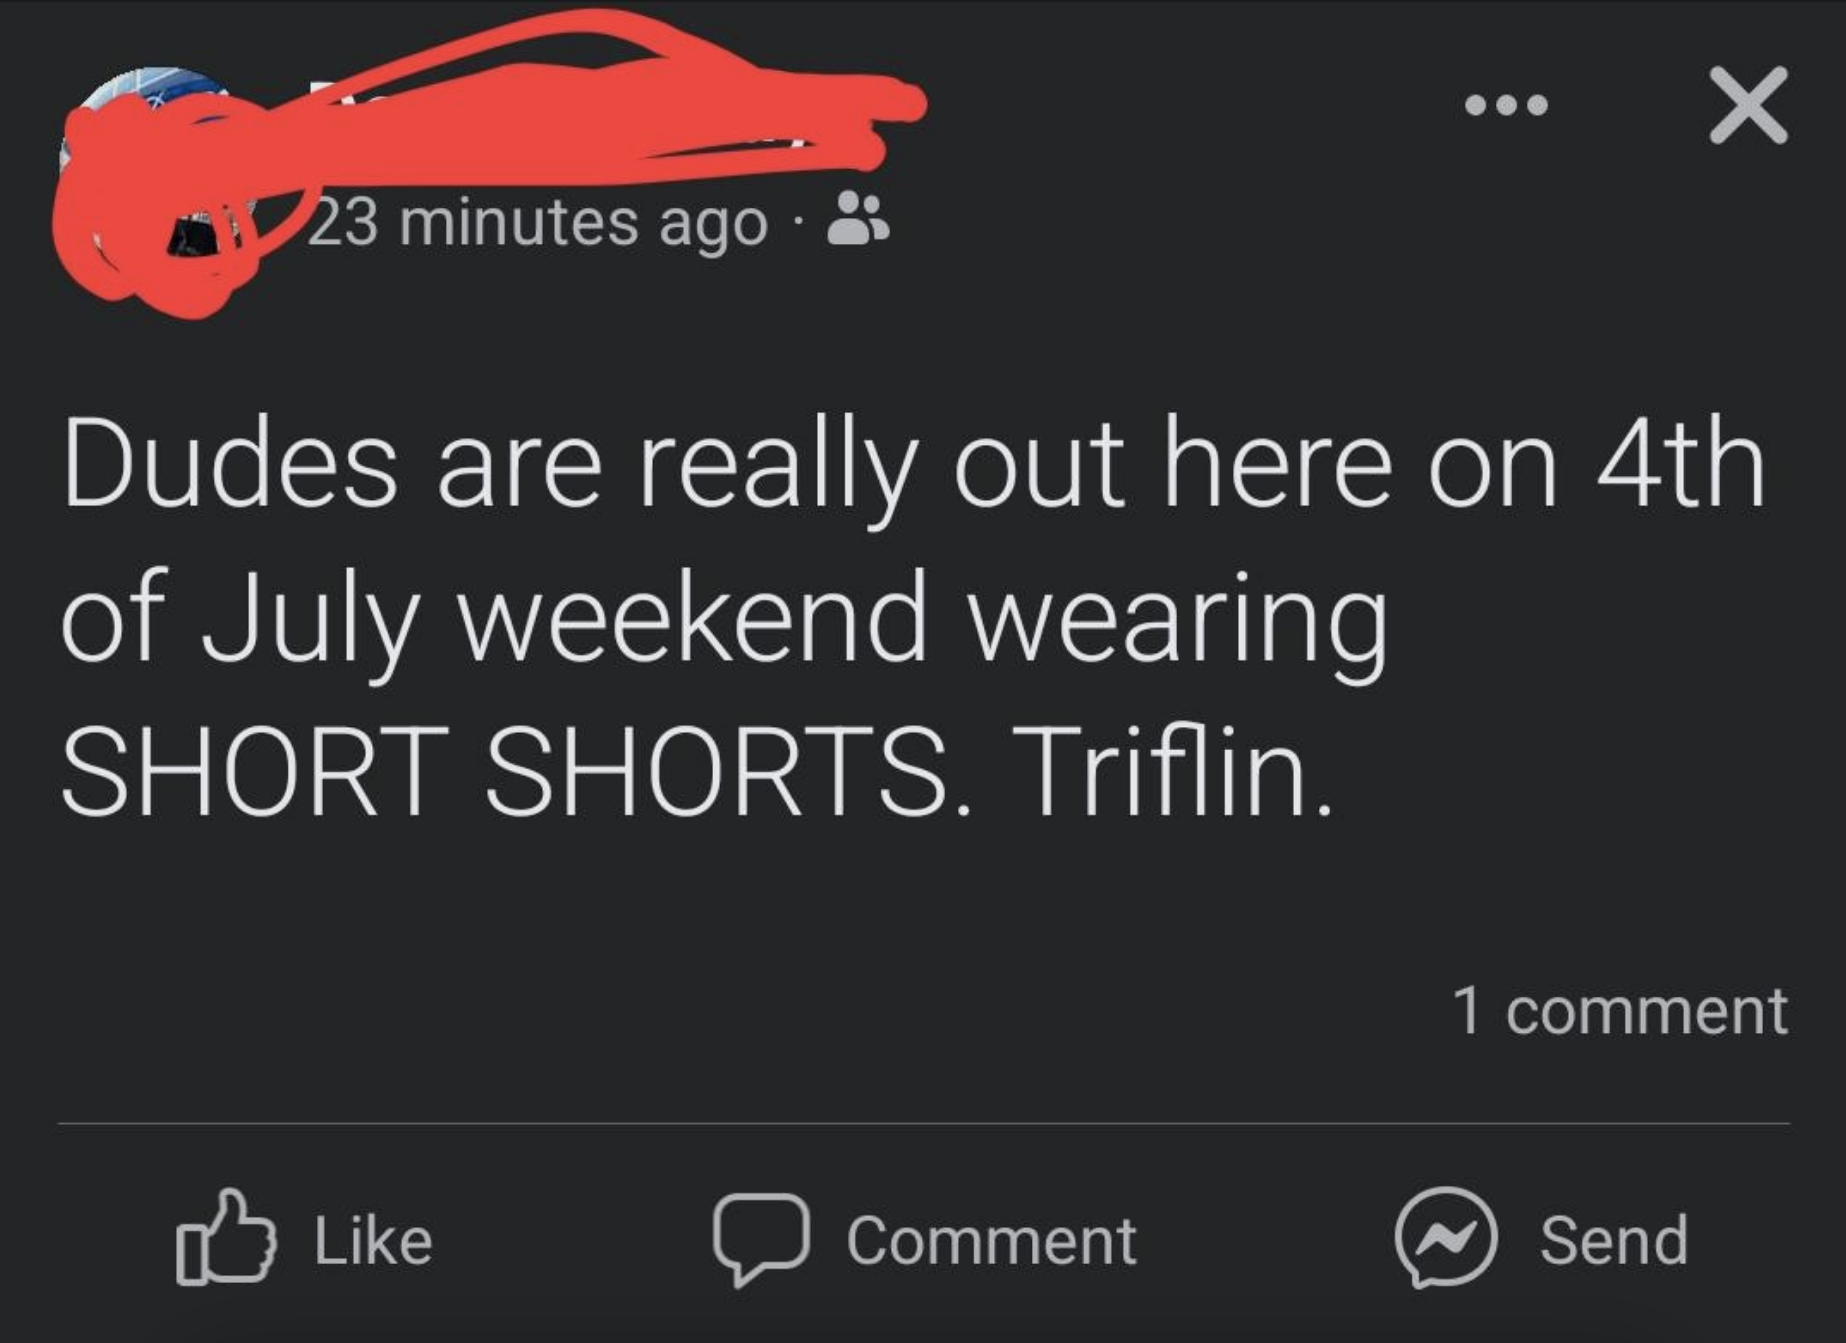 Status update saying, &quot;Dudes are really out here on 4th of July weekend wearing SHORT SHORTS. Triflin.&quot;